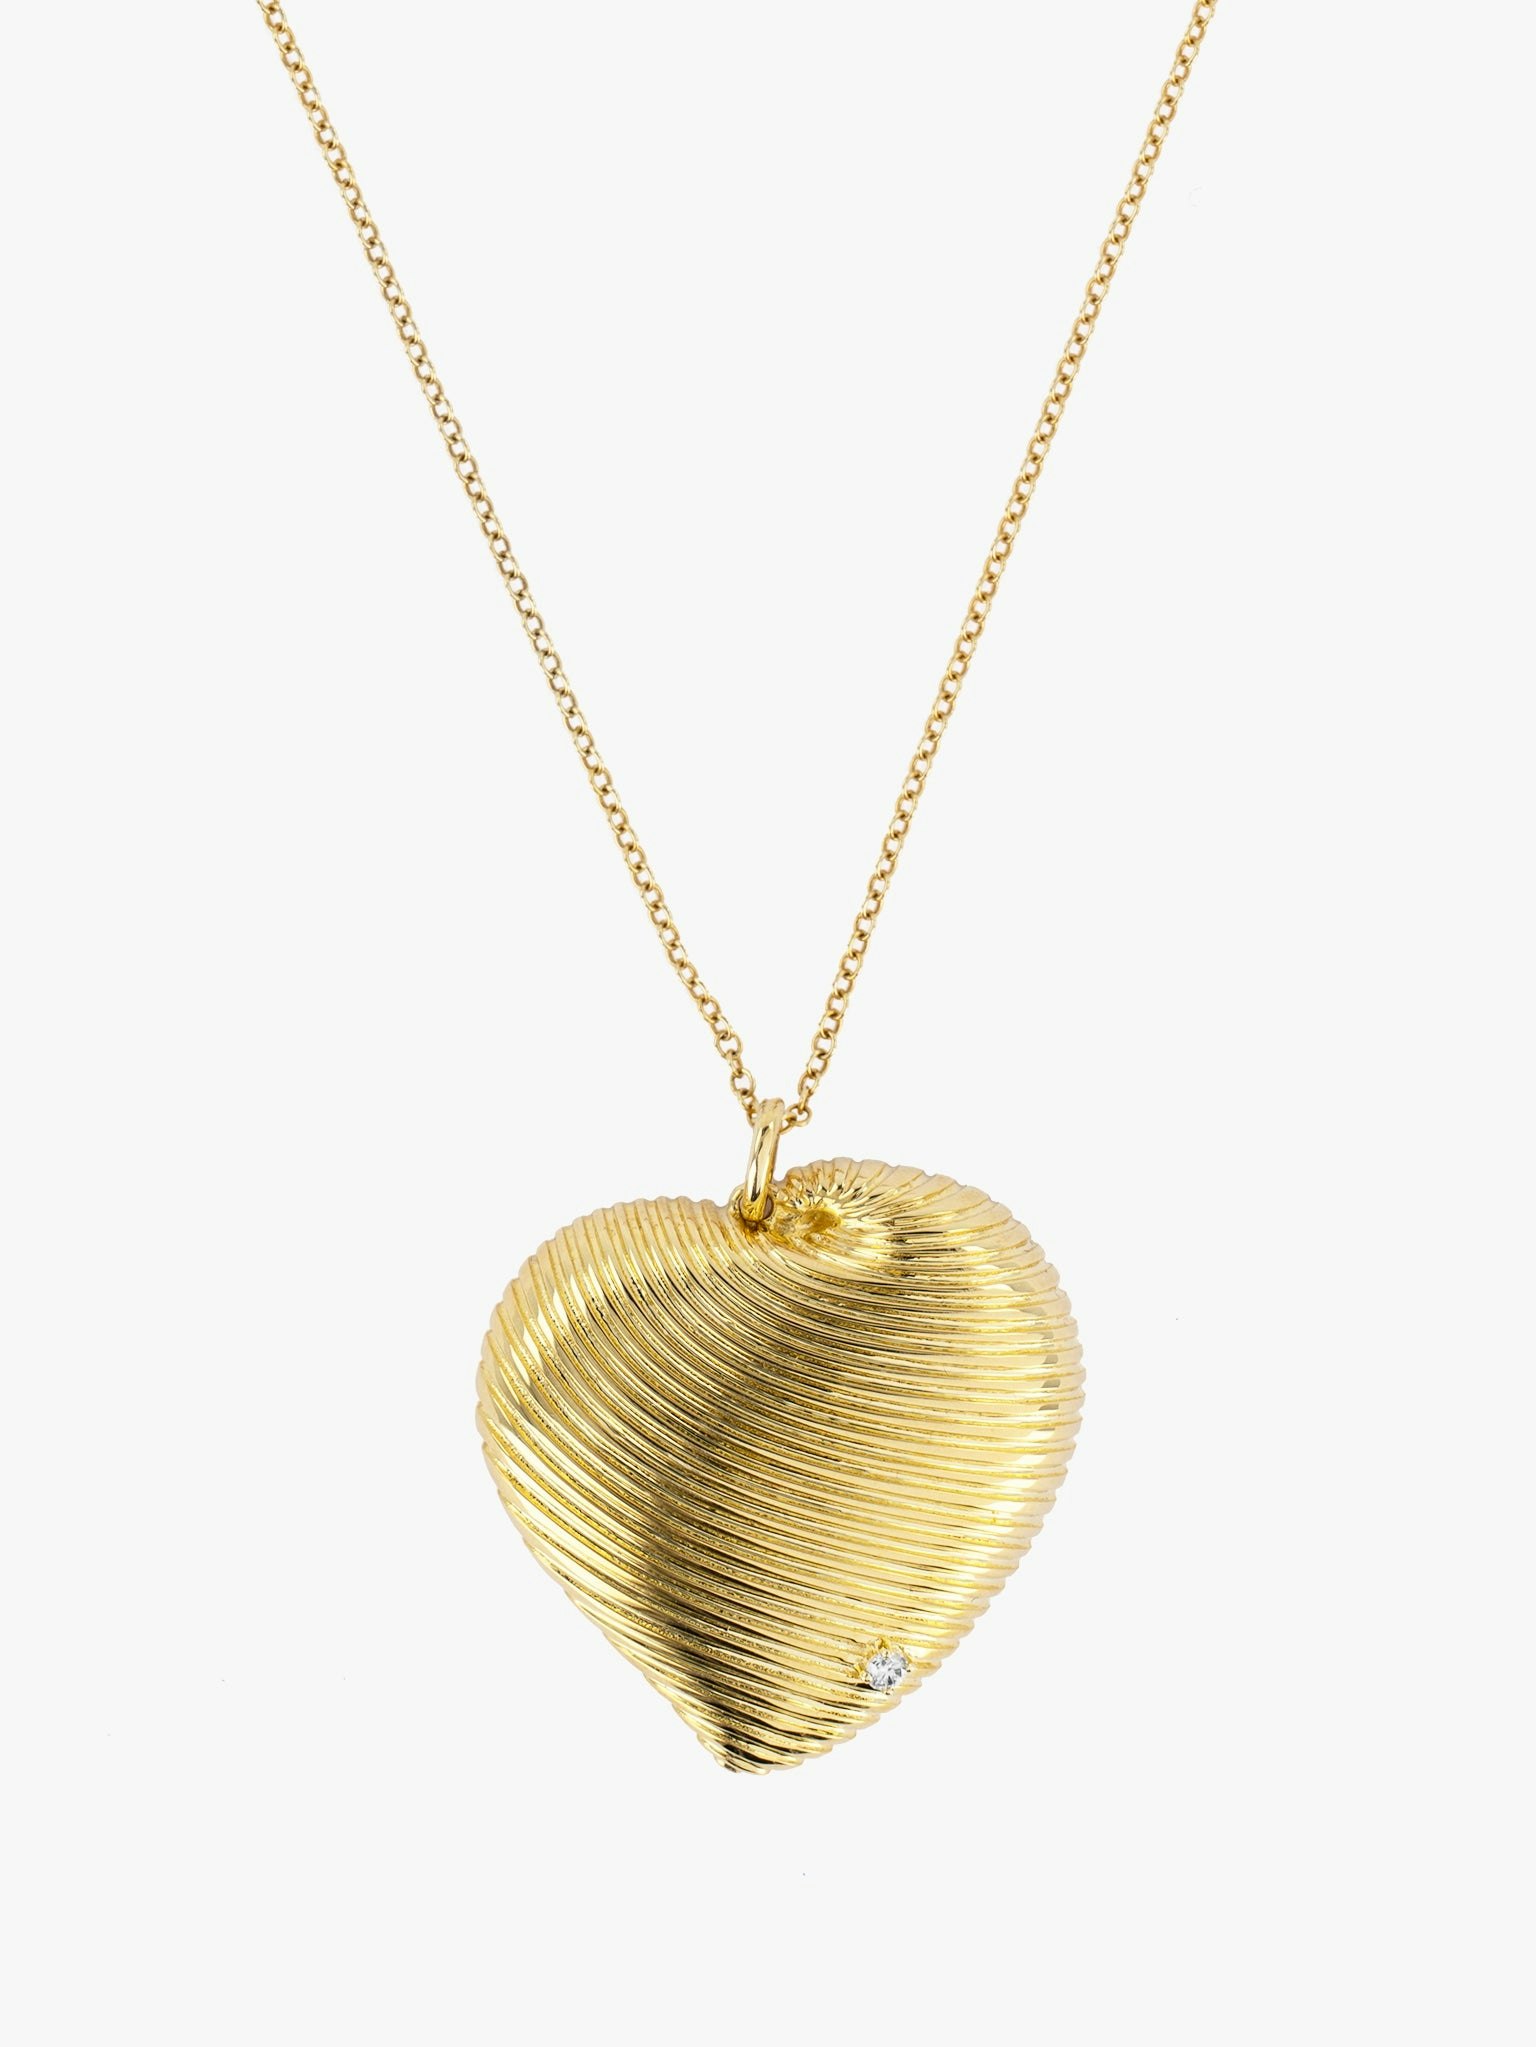 Diamond and gold heart pendant necklace photo 3